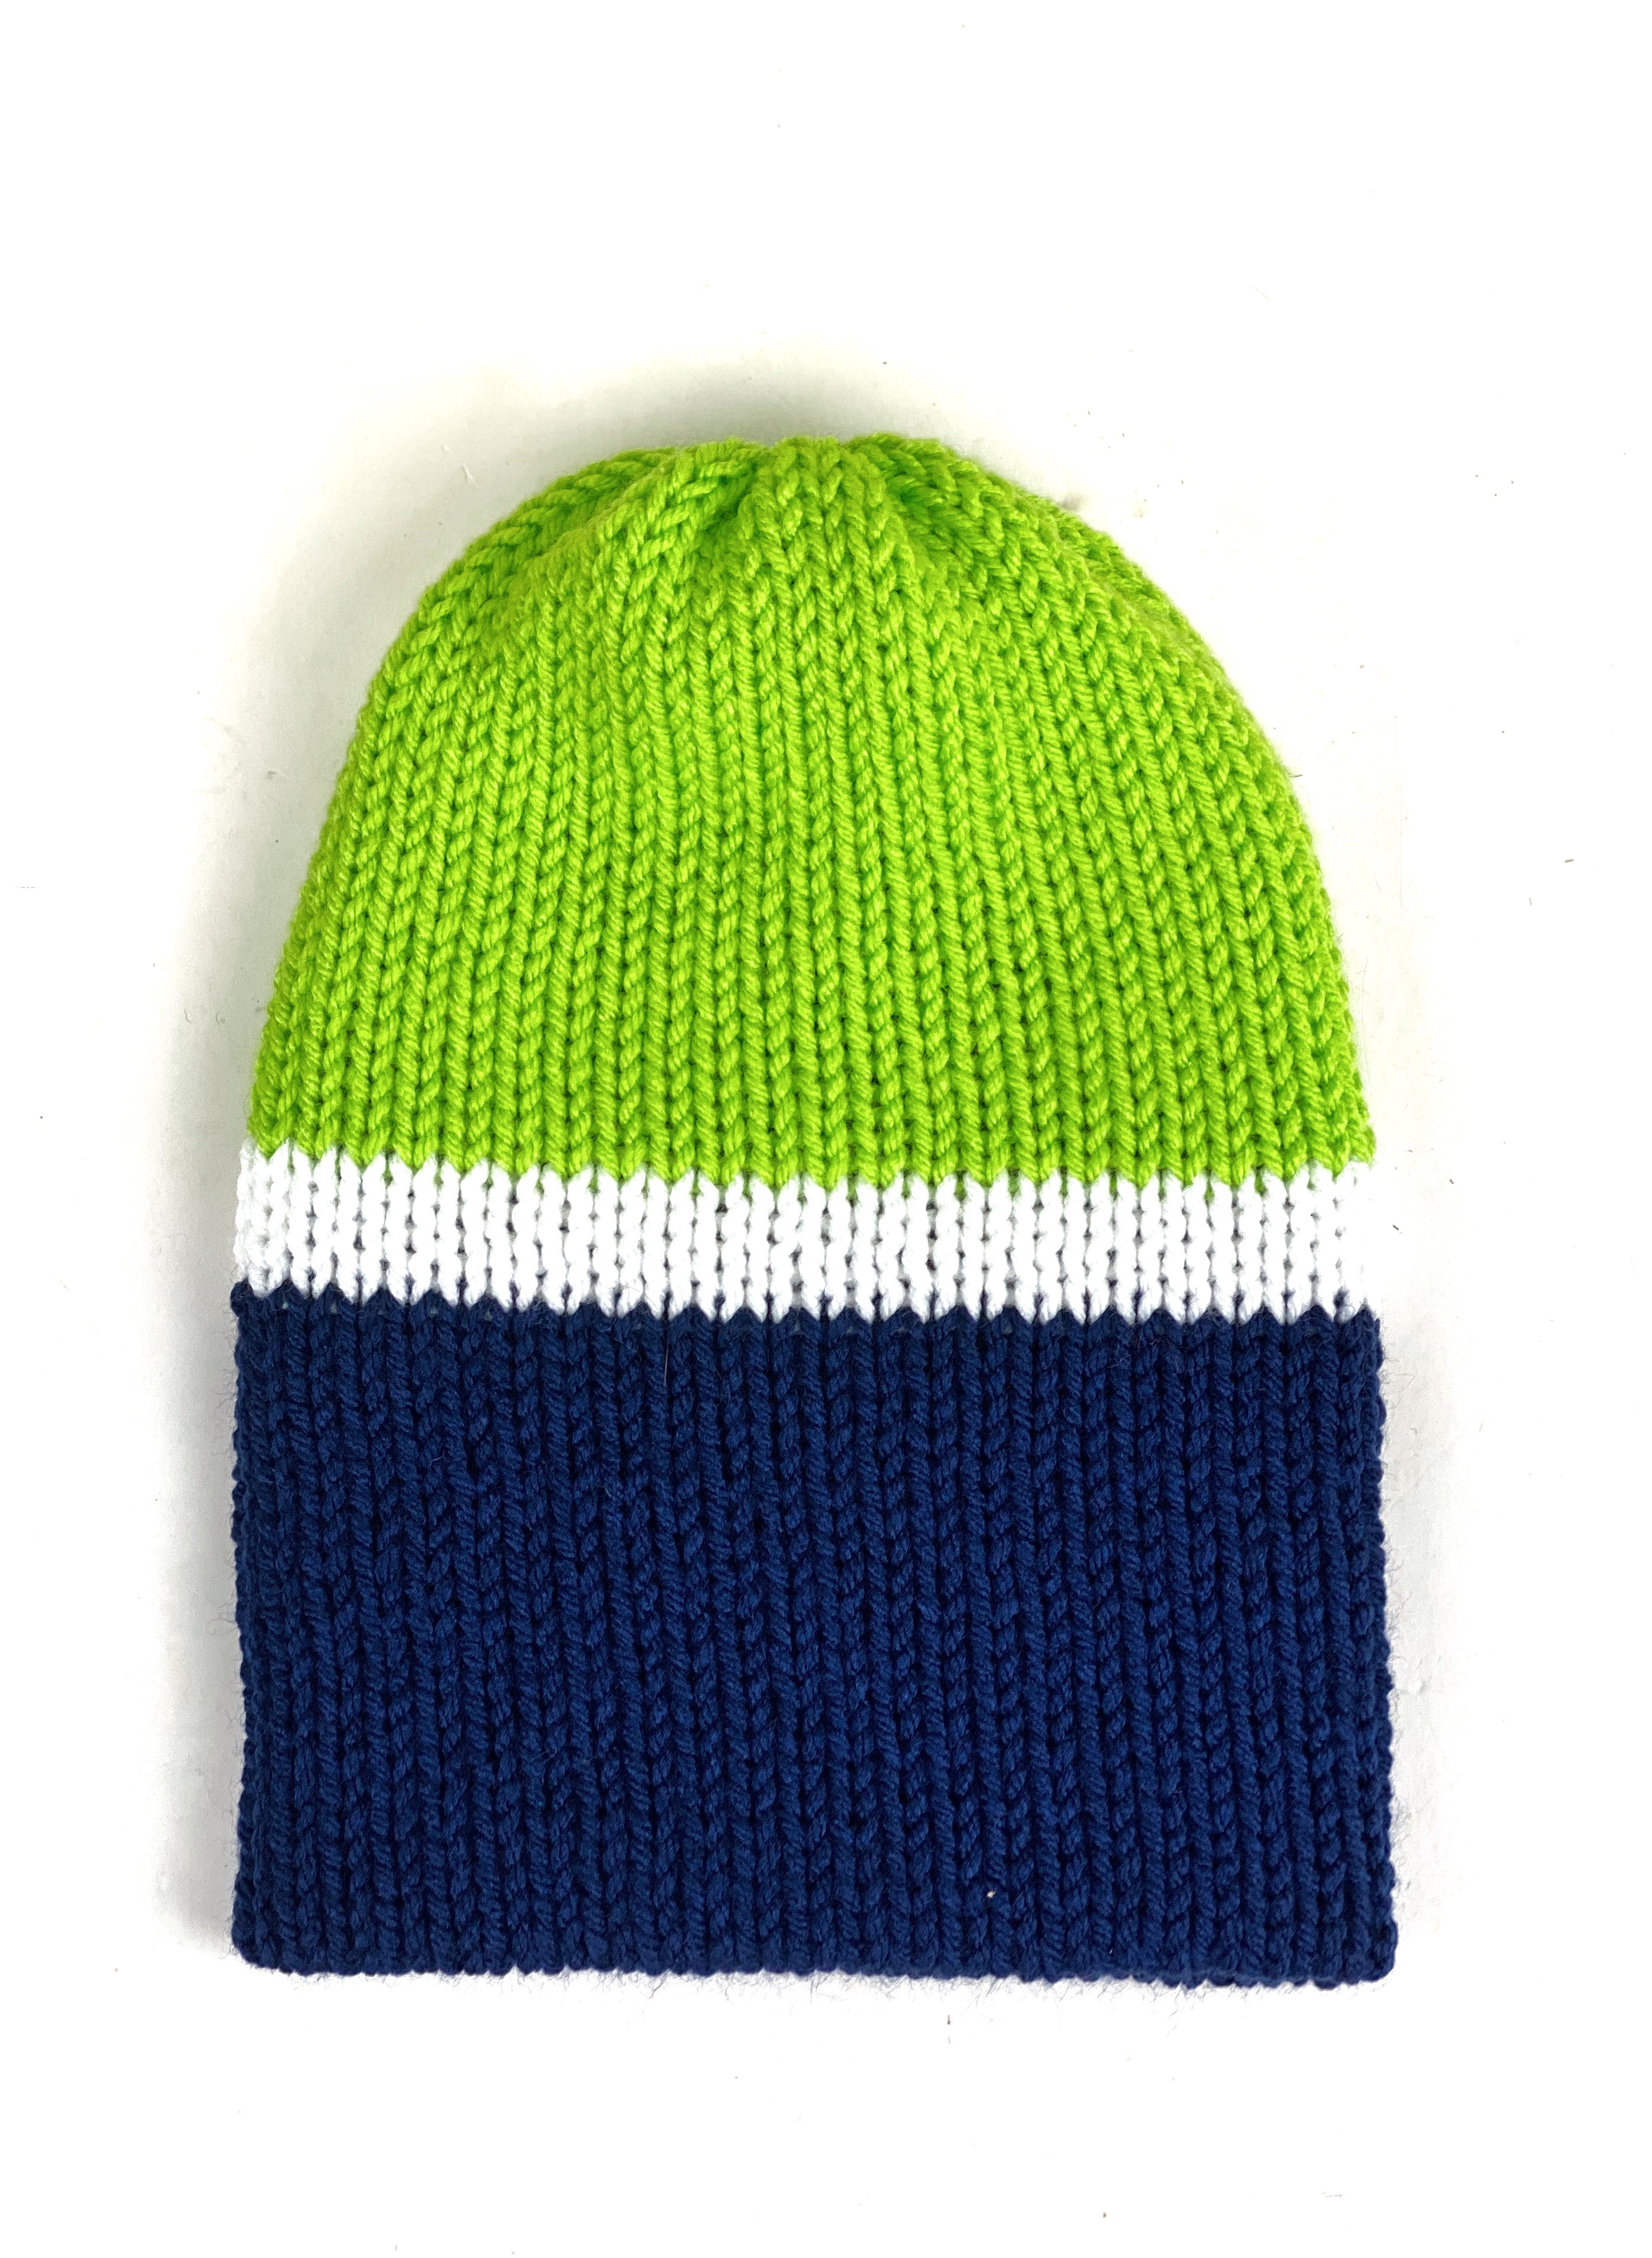 Seattle Team Colors Blue and Green Basic Reversible Knit Beanie Double Layer Acrylic Hat Teen Adult Female